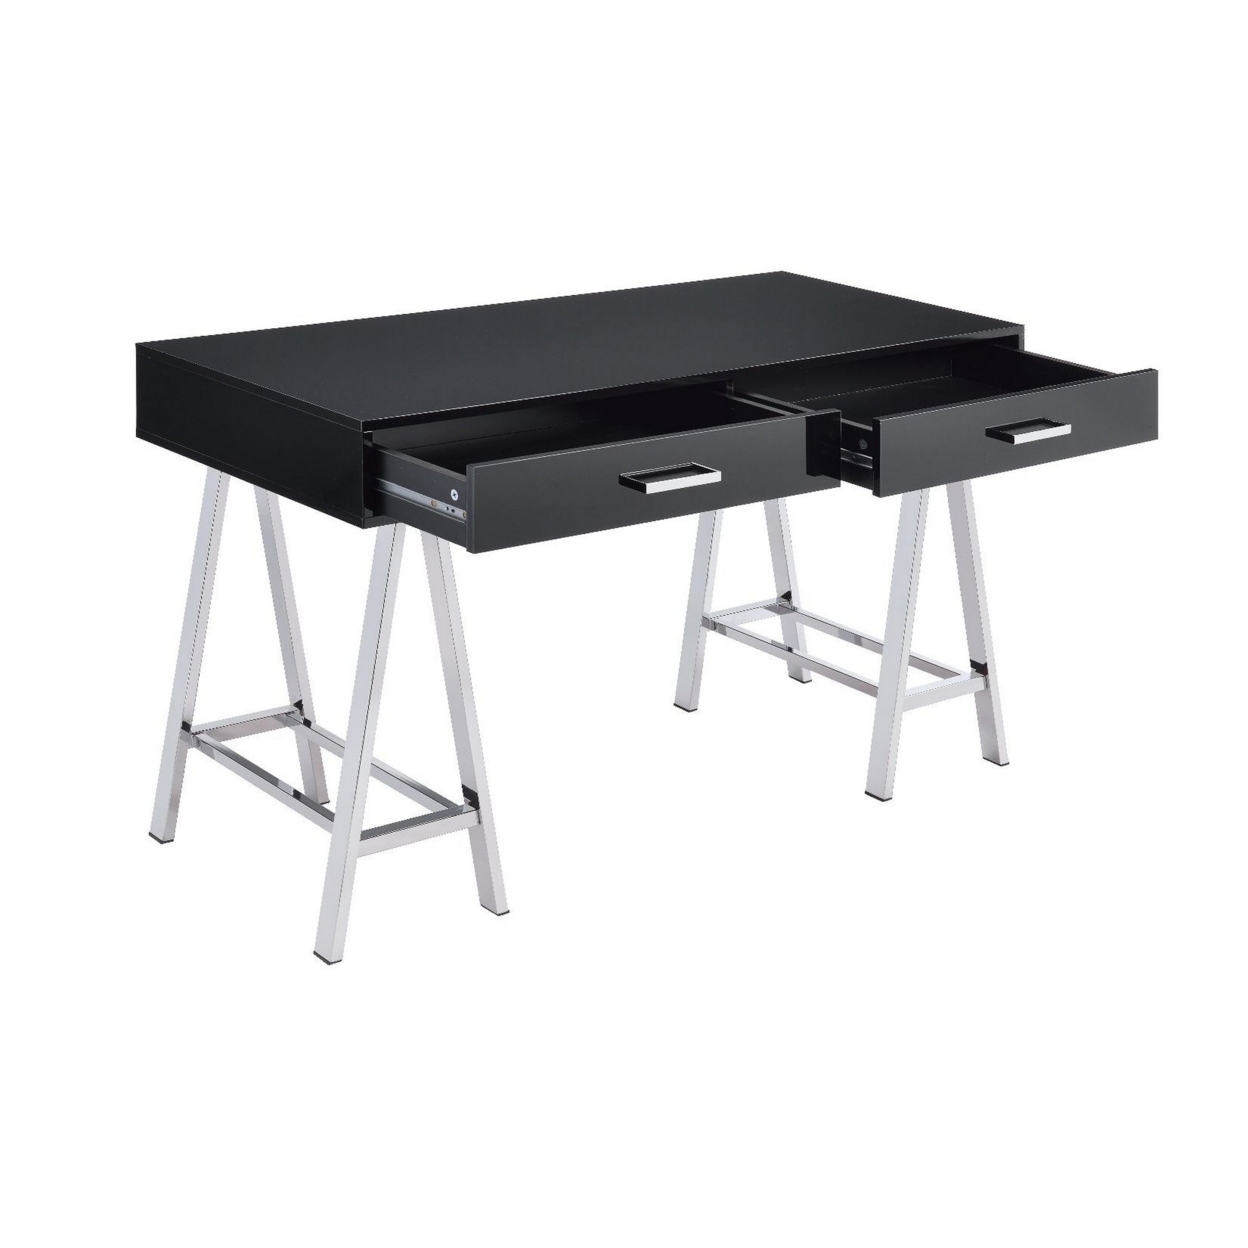 Writing Desk With MDF 2 Drawers And Metal Legs, Black And Chrome- Saltoro Sherpi